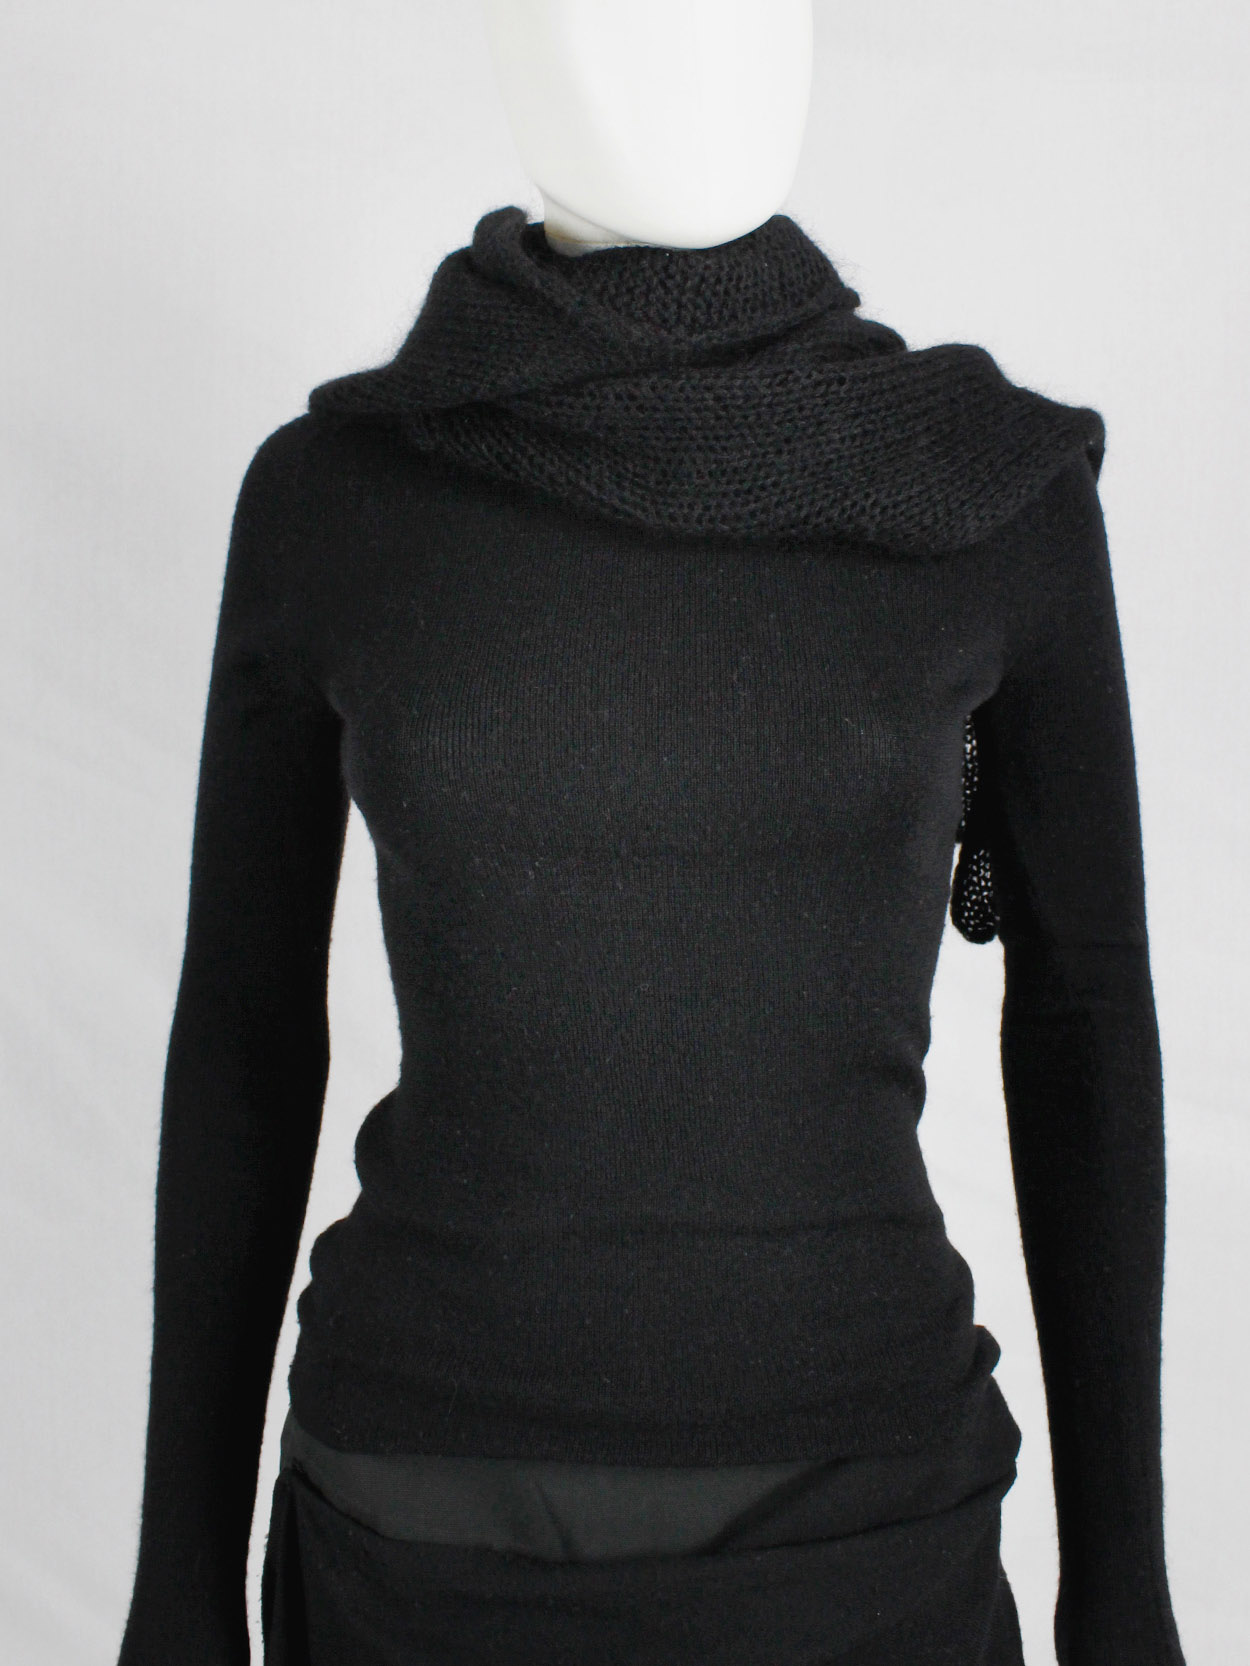 Y's Yohji Yamamoto black jumper with attached panel or scarf and extra ...